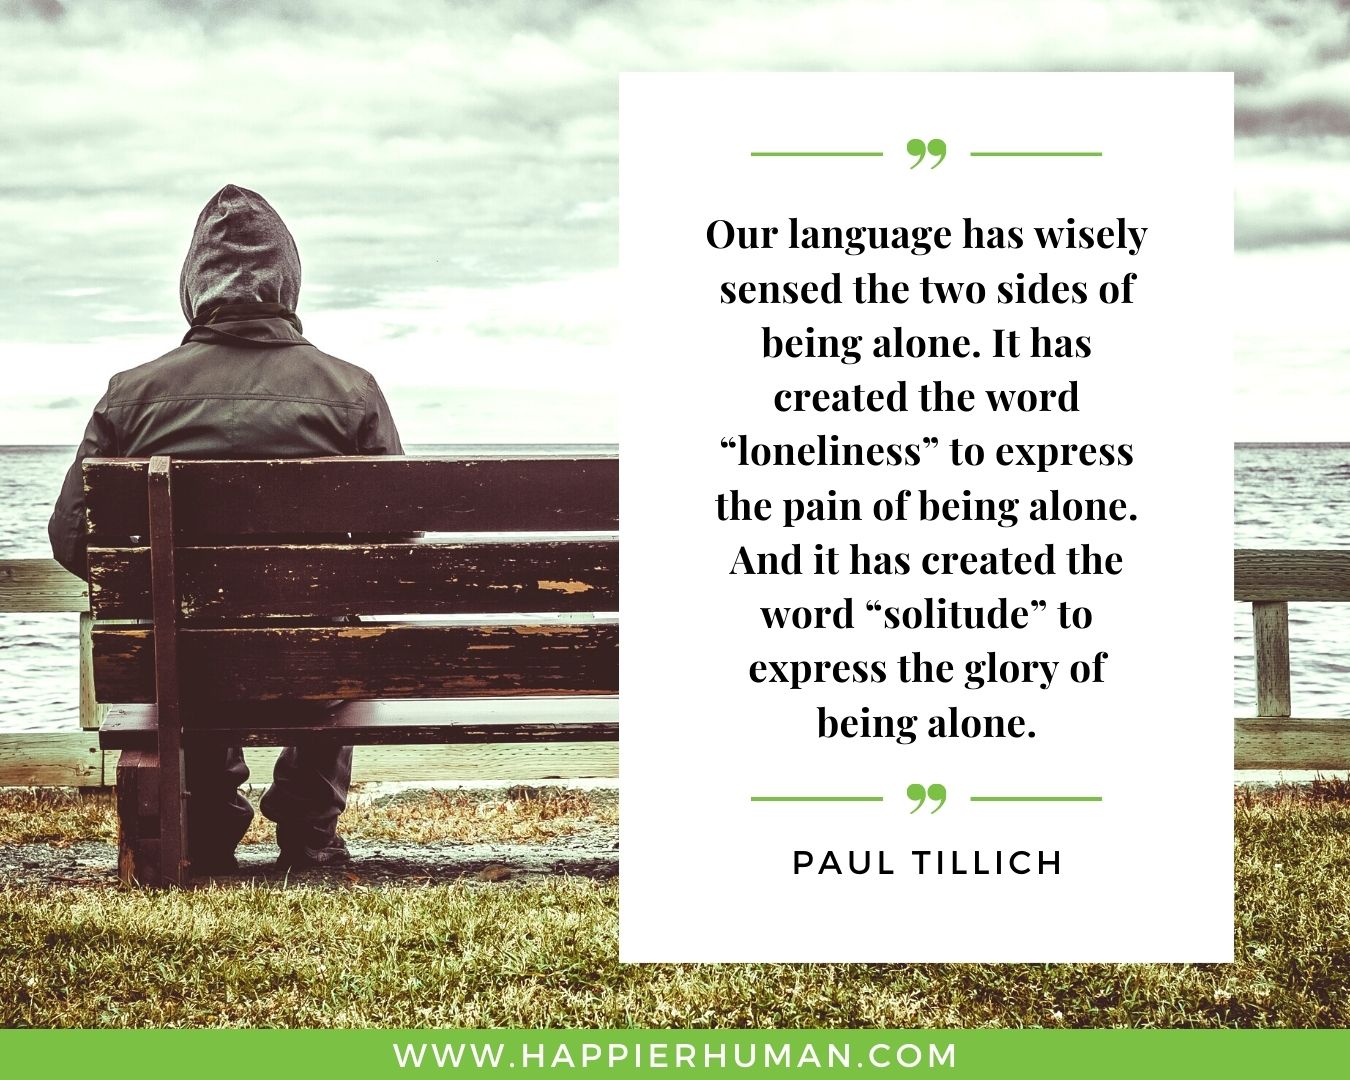 Introvert Quotes - “Our language has wisely sensed the two sides of being alone. It has created the word “loneliness” to express the pain of being alone. And it has created the word “solitude” to express the glory of being alone.” – Paul Tillich